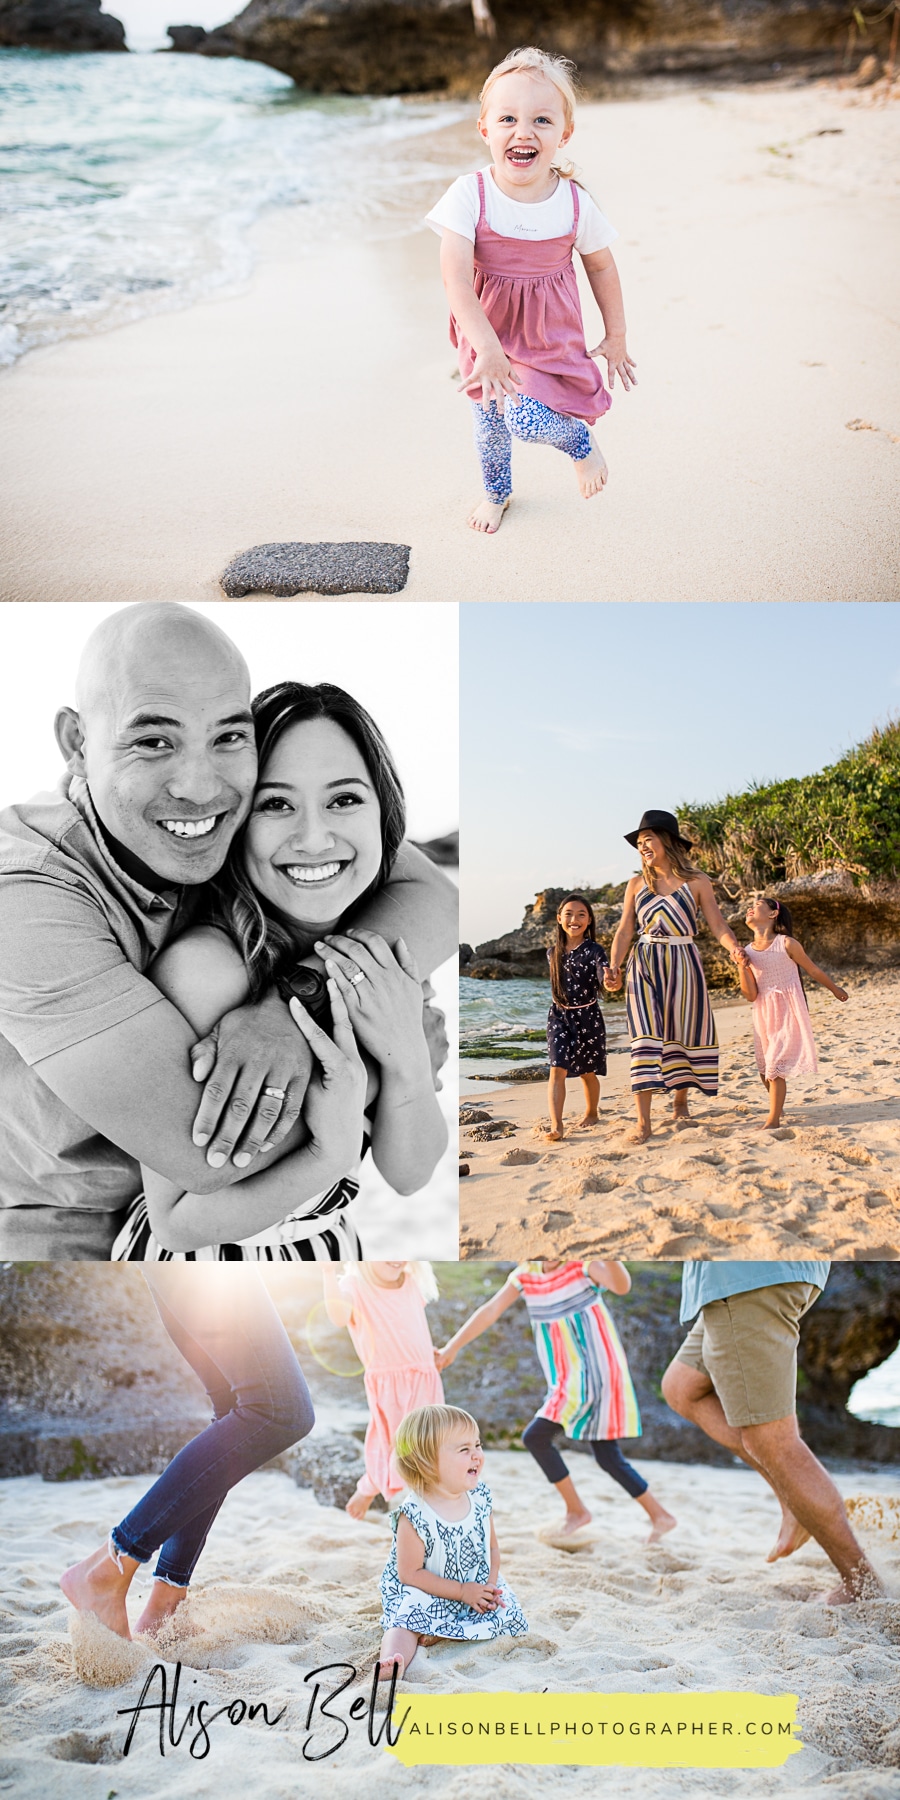 Half Priced Beach Mini sessions by Alison Bell, Photographer. Family, baby, toddler, kids and high school senior portraits. 